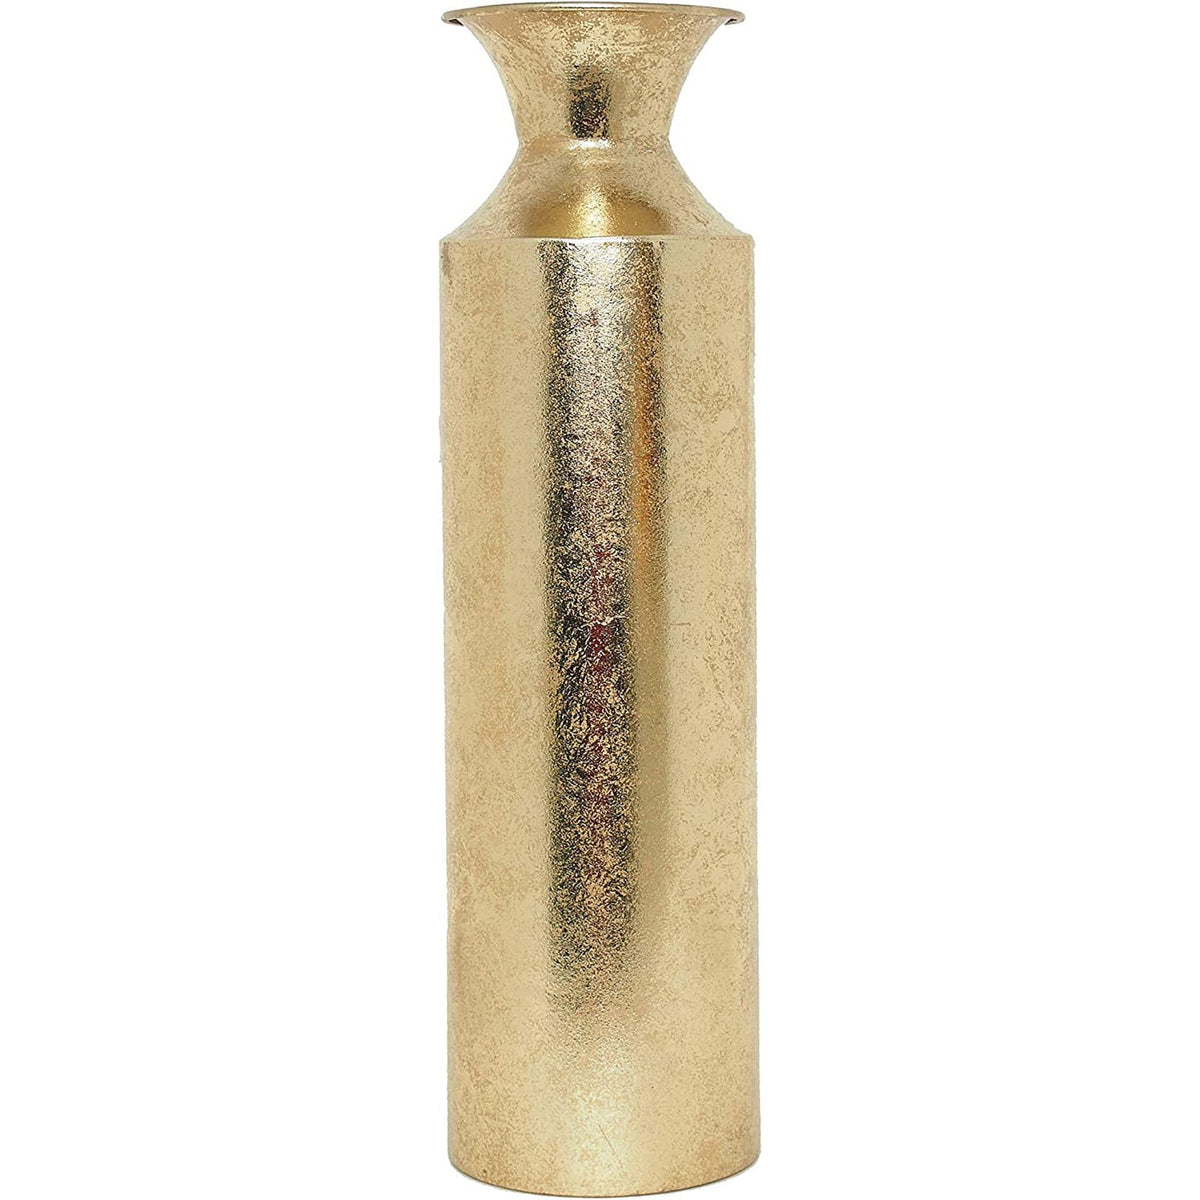 HOSLEY® Metal Tall Floor Vase, Gold Finish, 21.75 Inches High